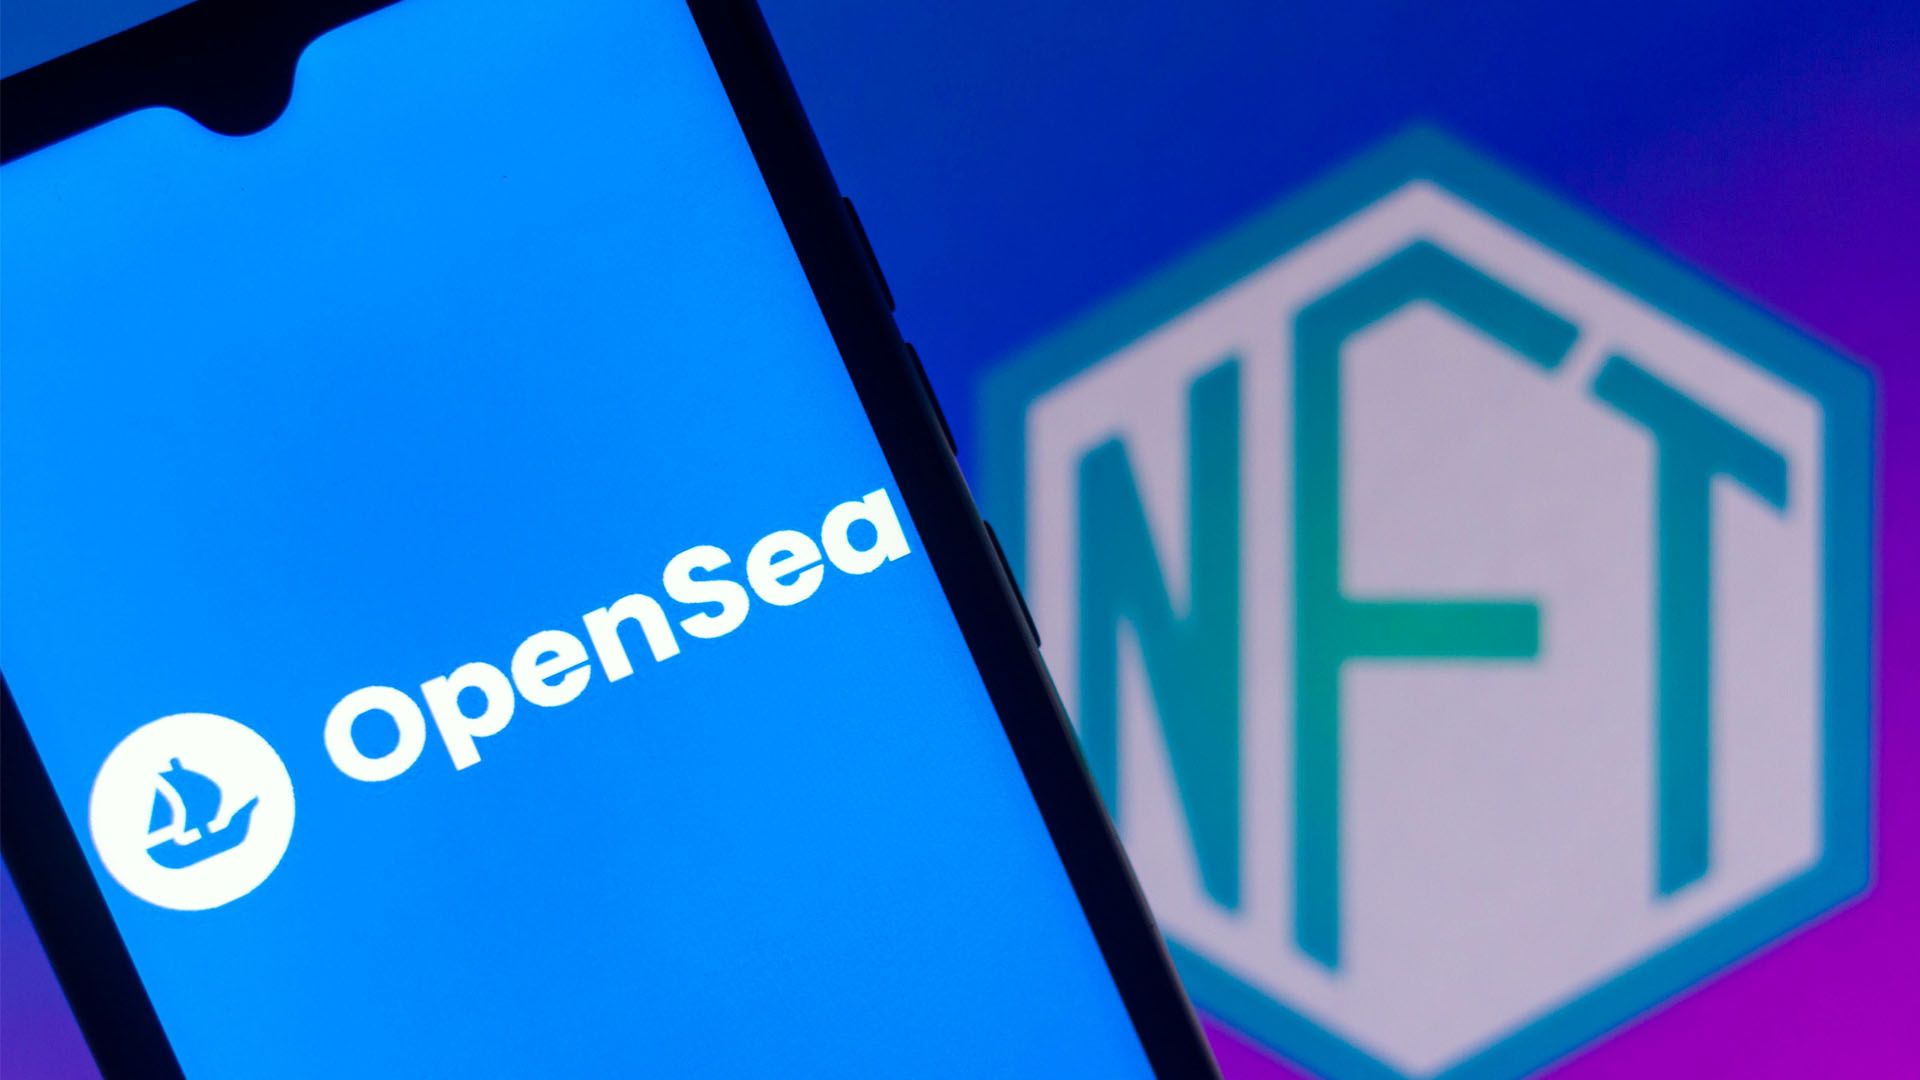 OpenSea pause planned update due to phishing attack targeting NFT migration